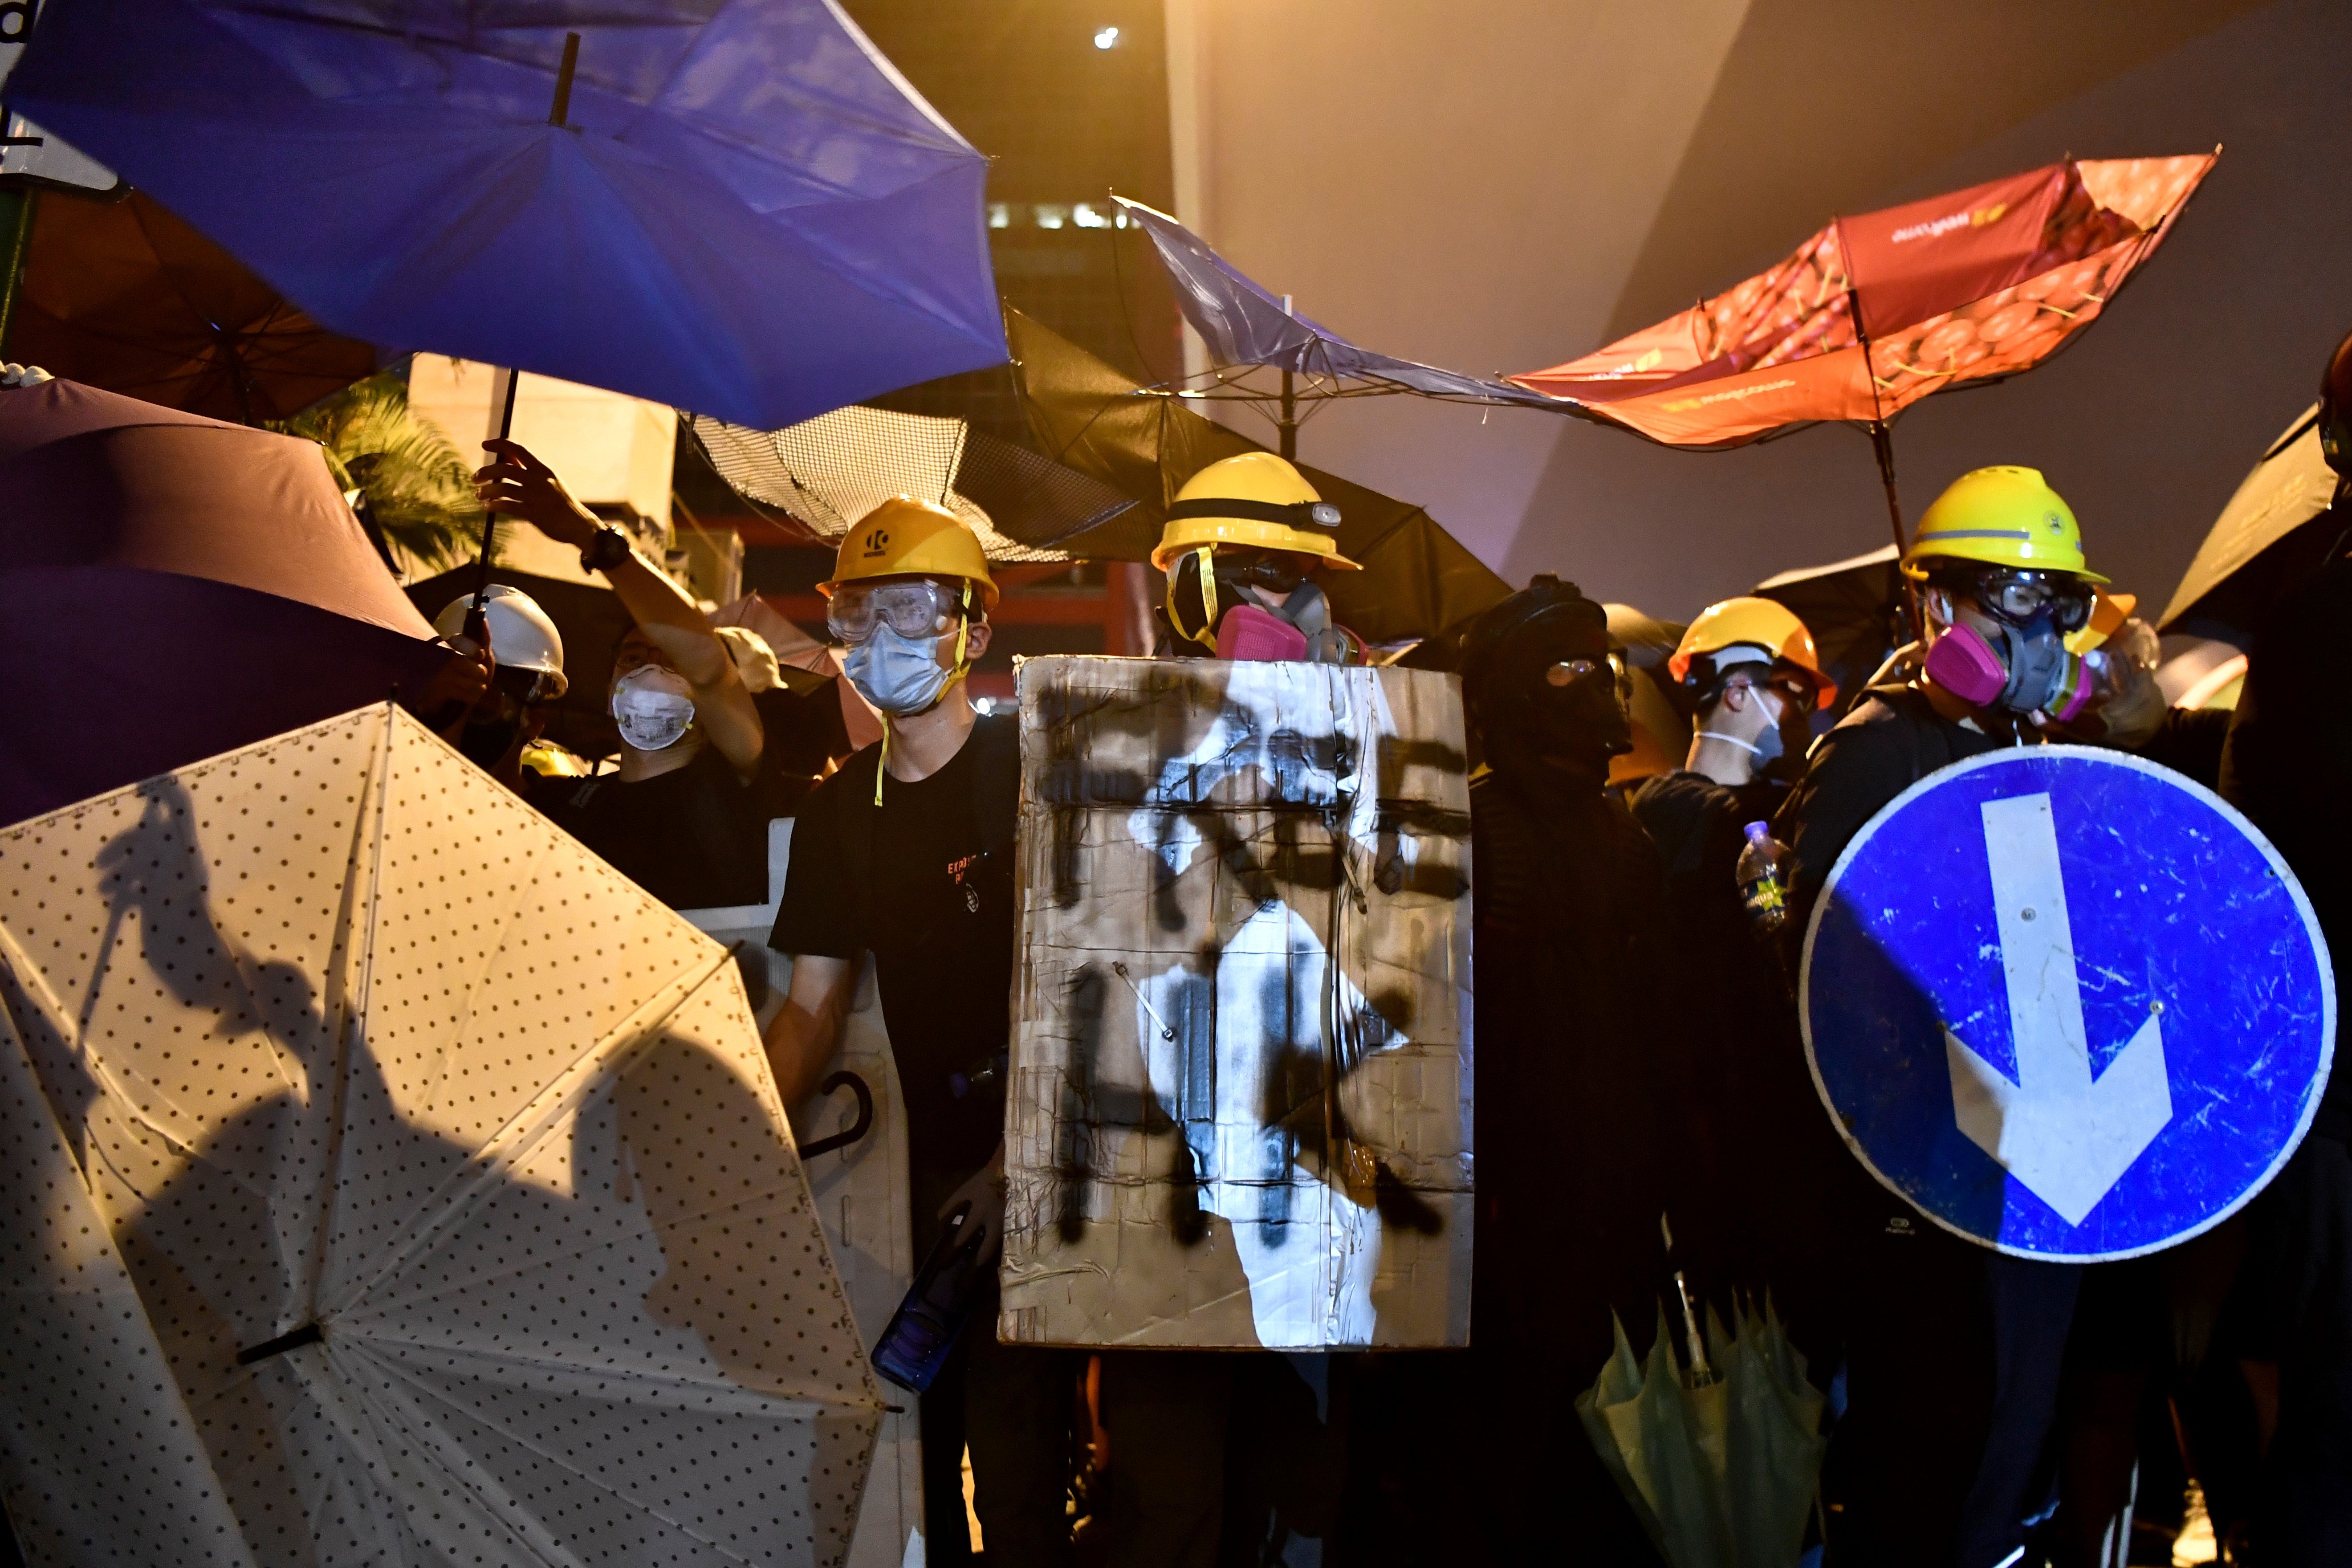 The ruling is a defeat for pro-democracy in Hong Kong